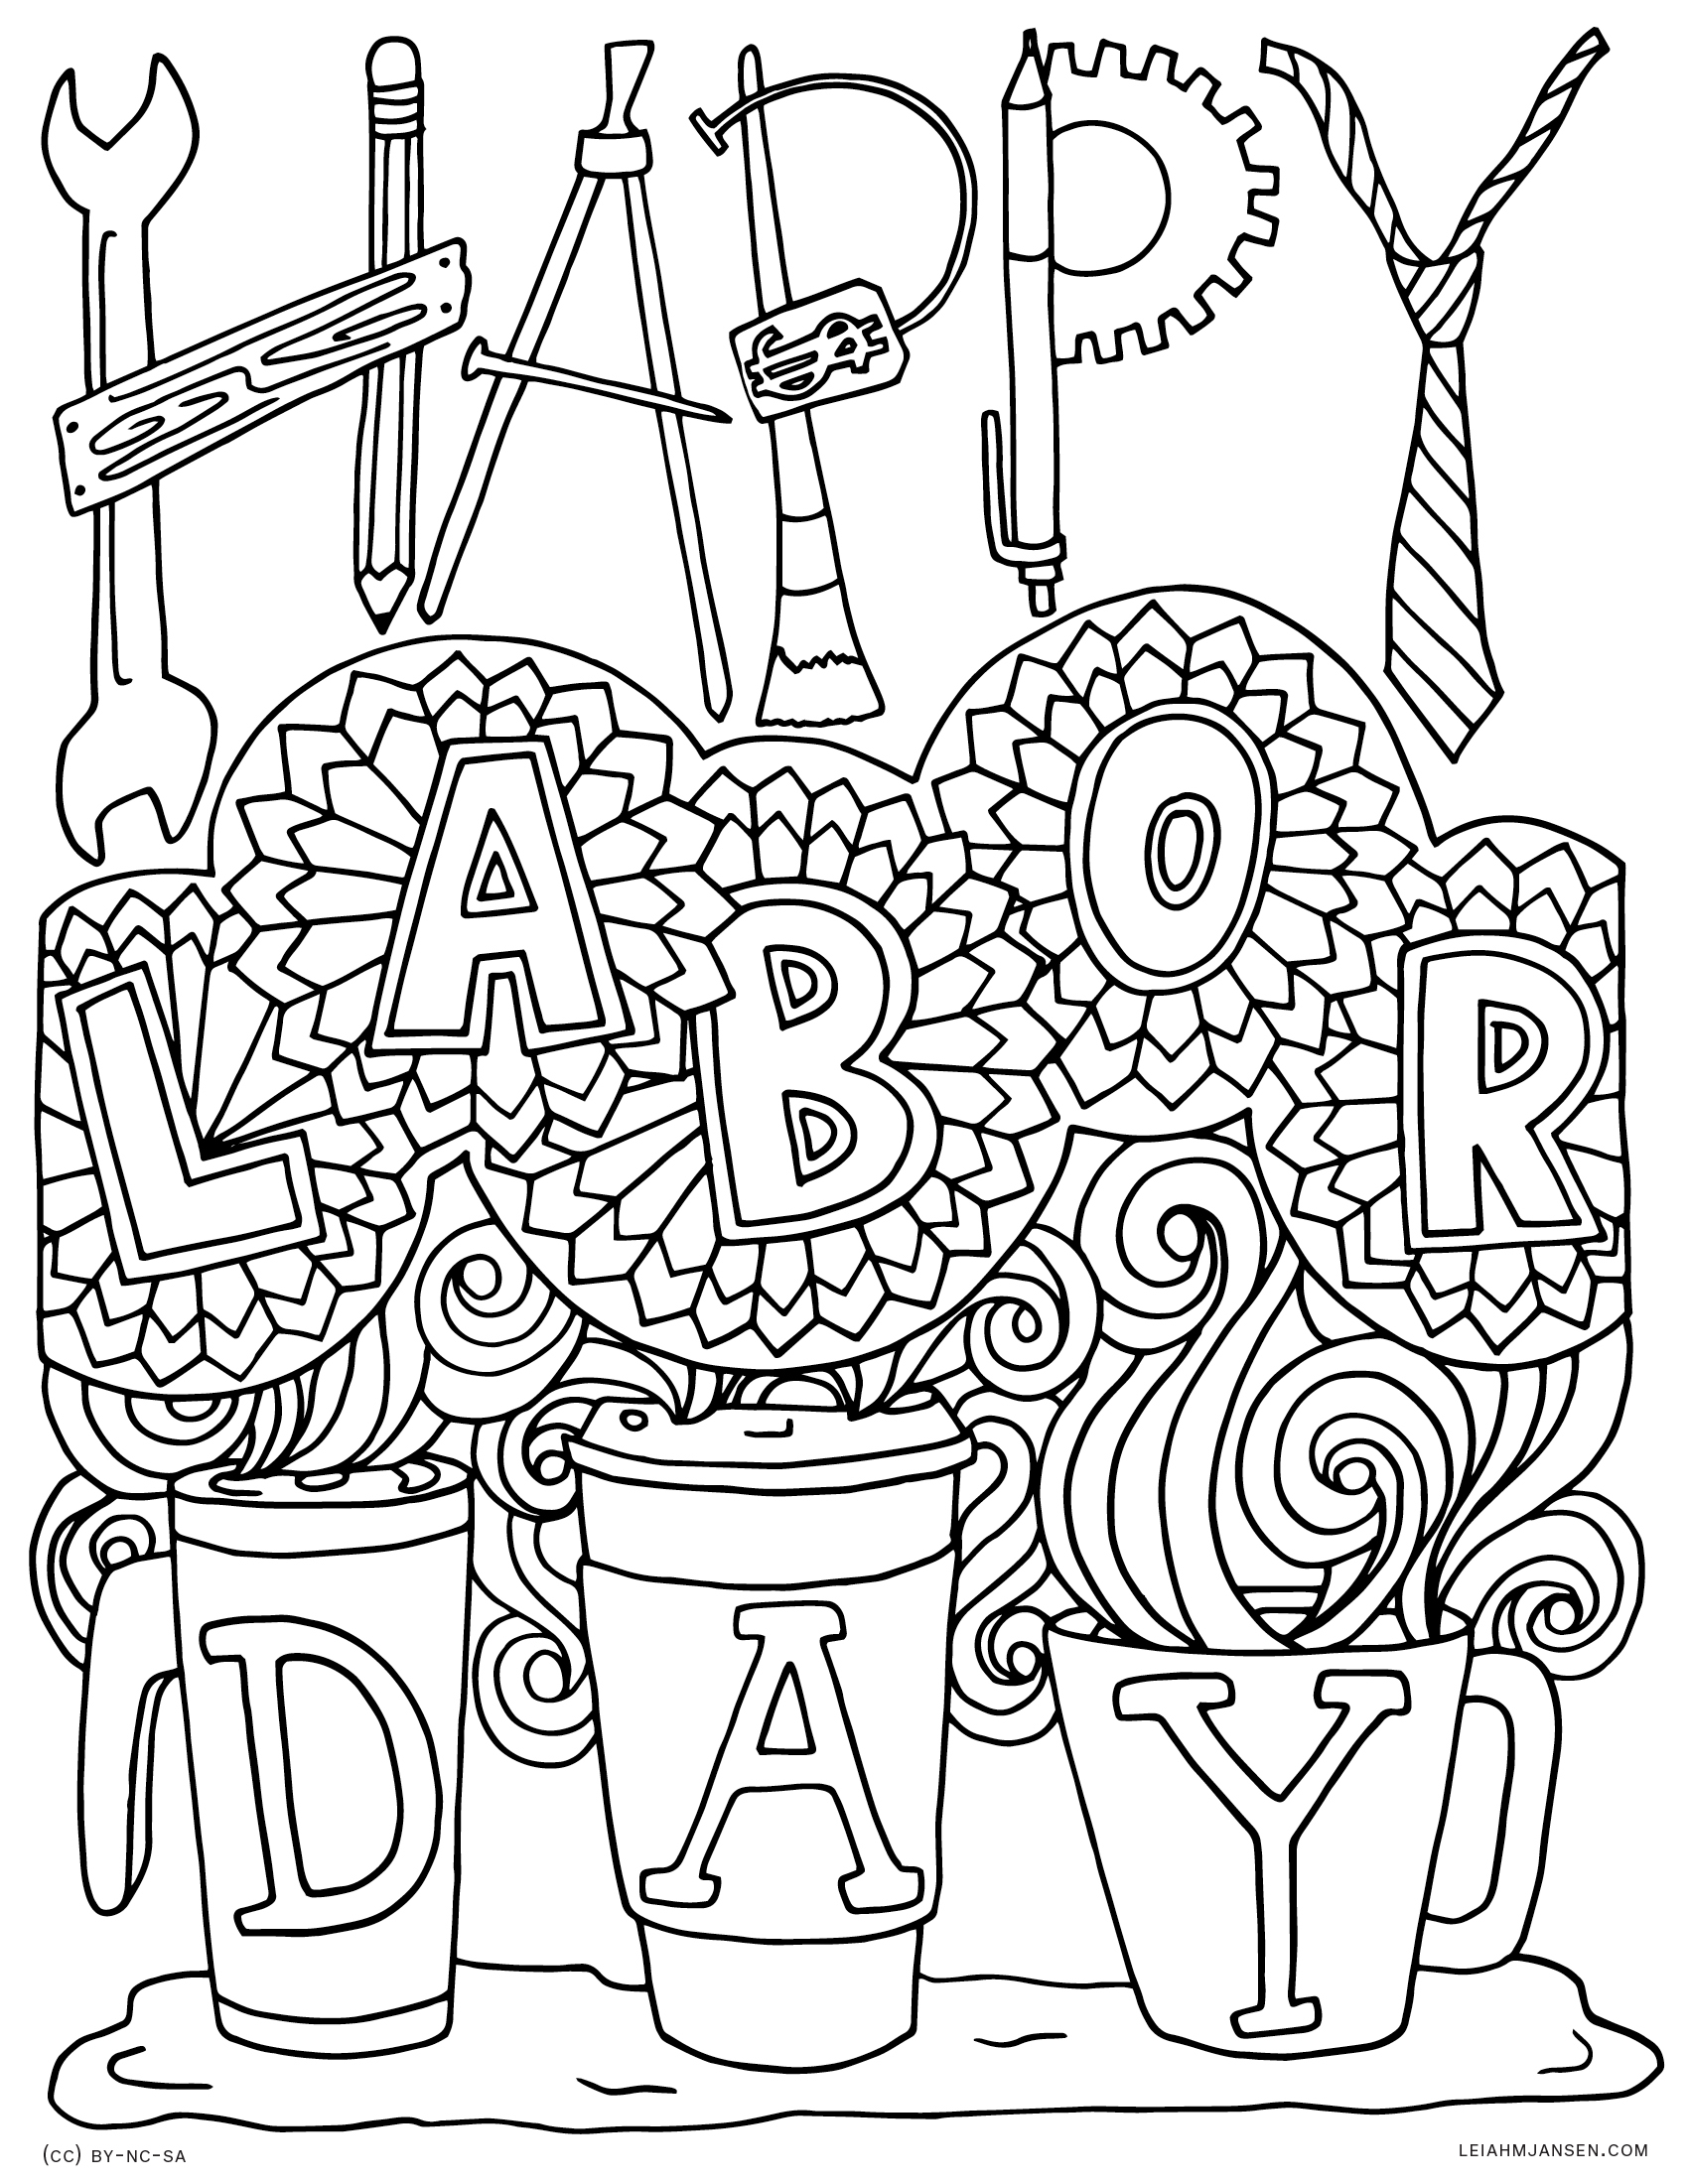 Labor Day Coloring Pages - Kidsuki